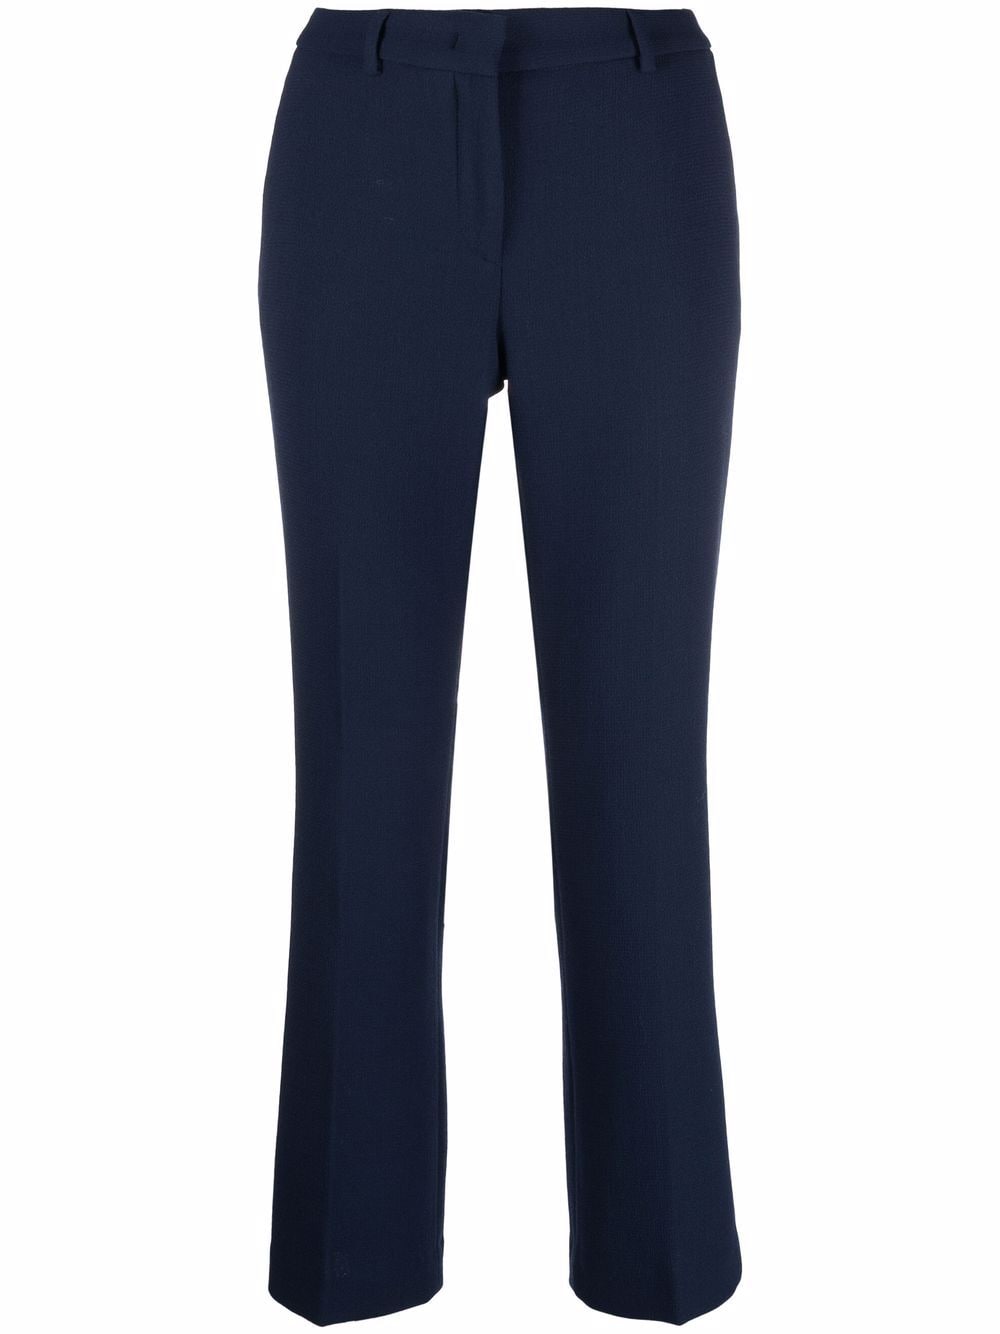 L'Autre Chose cropped tailored trousers